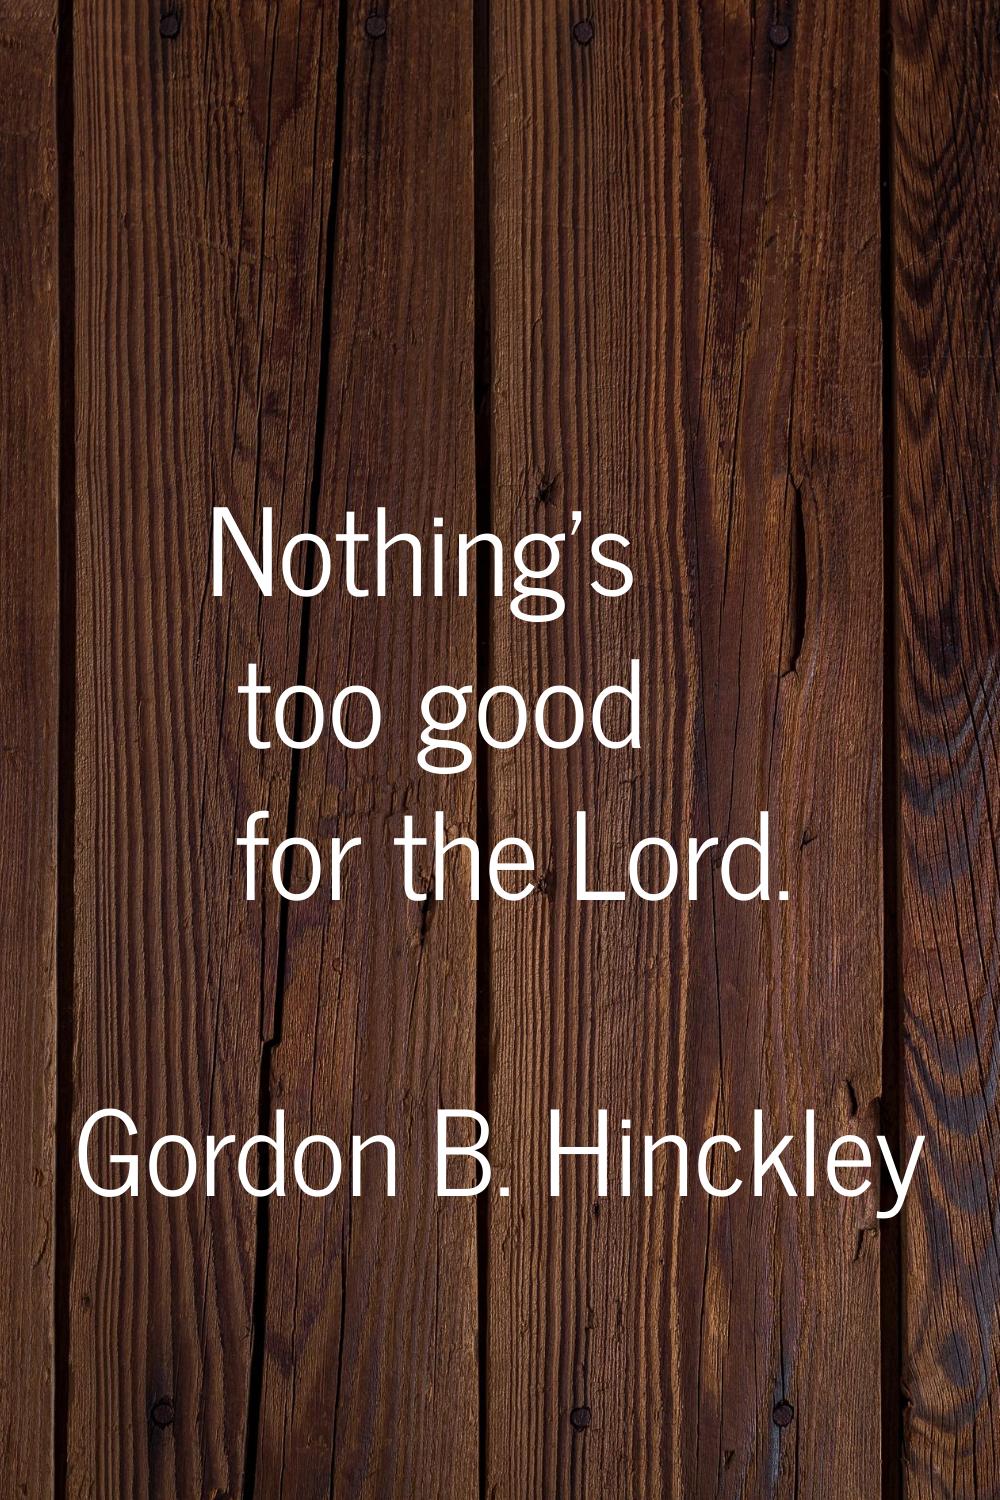 Nothing's too good for the Lord.